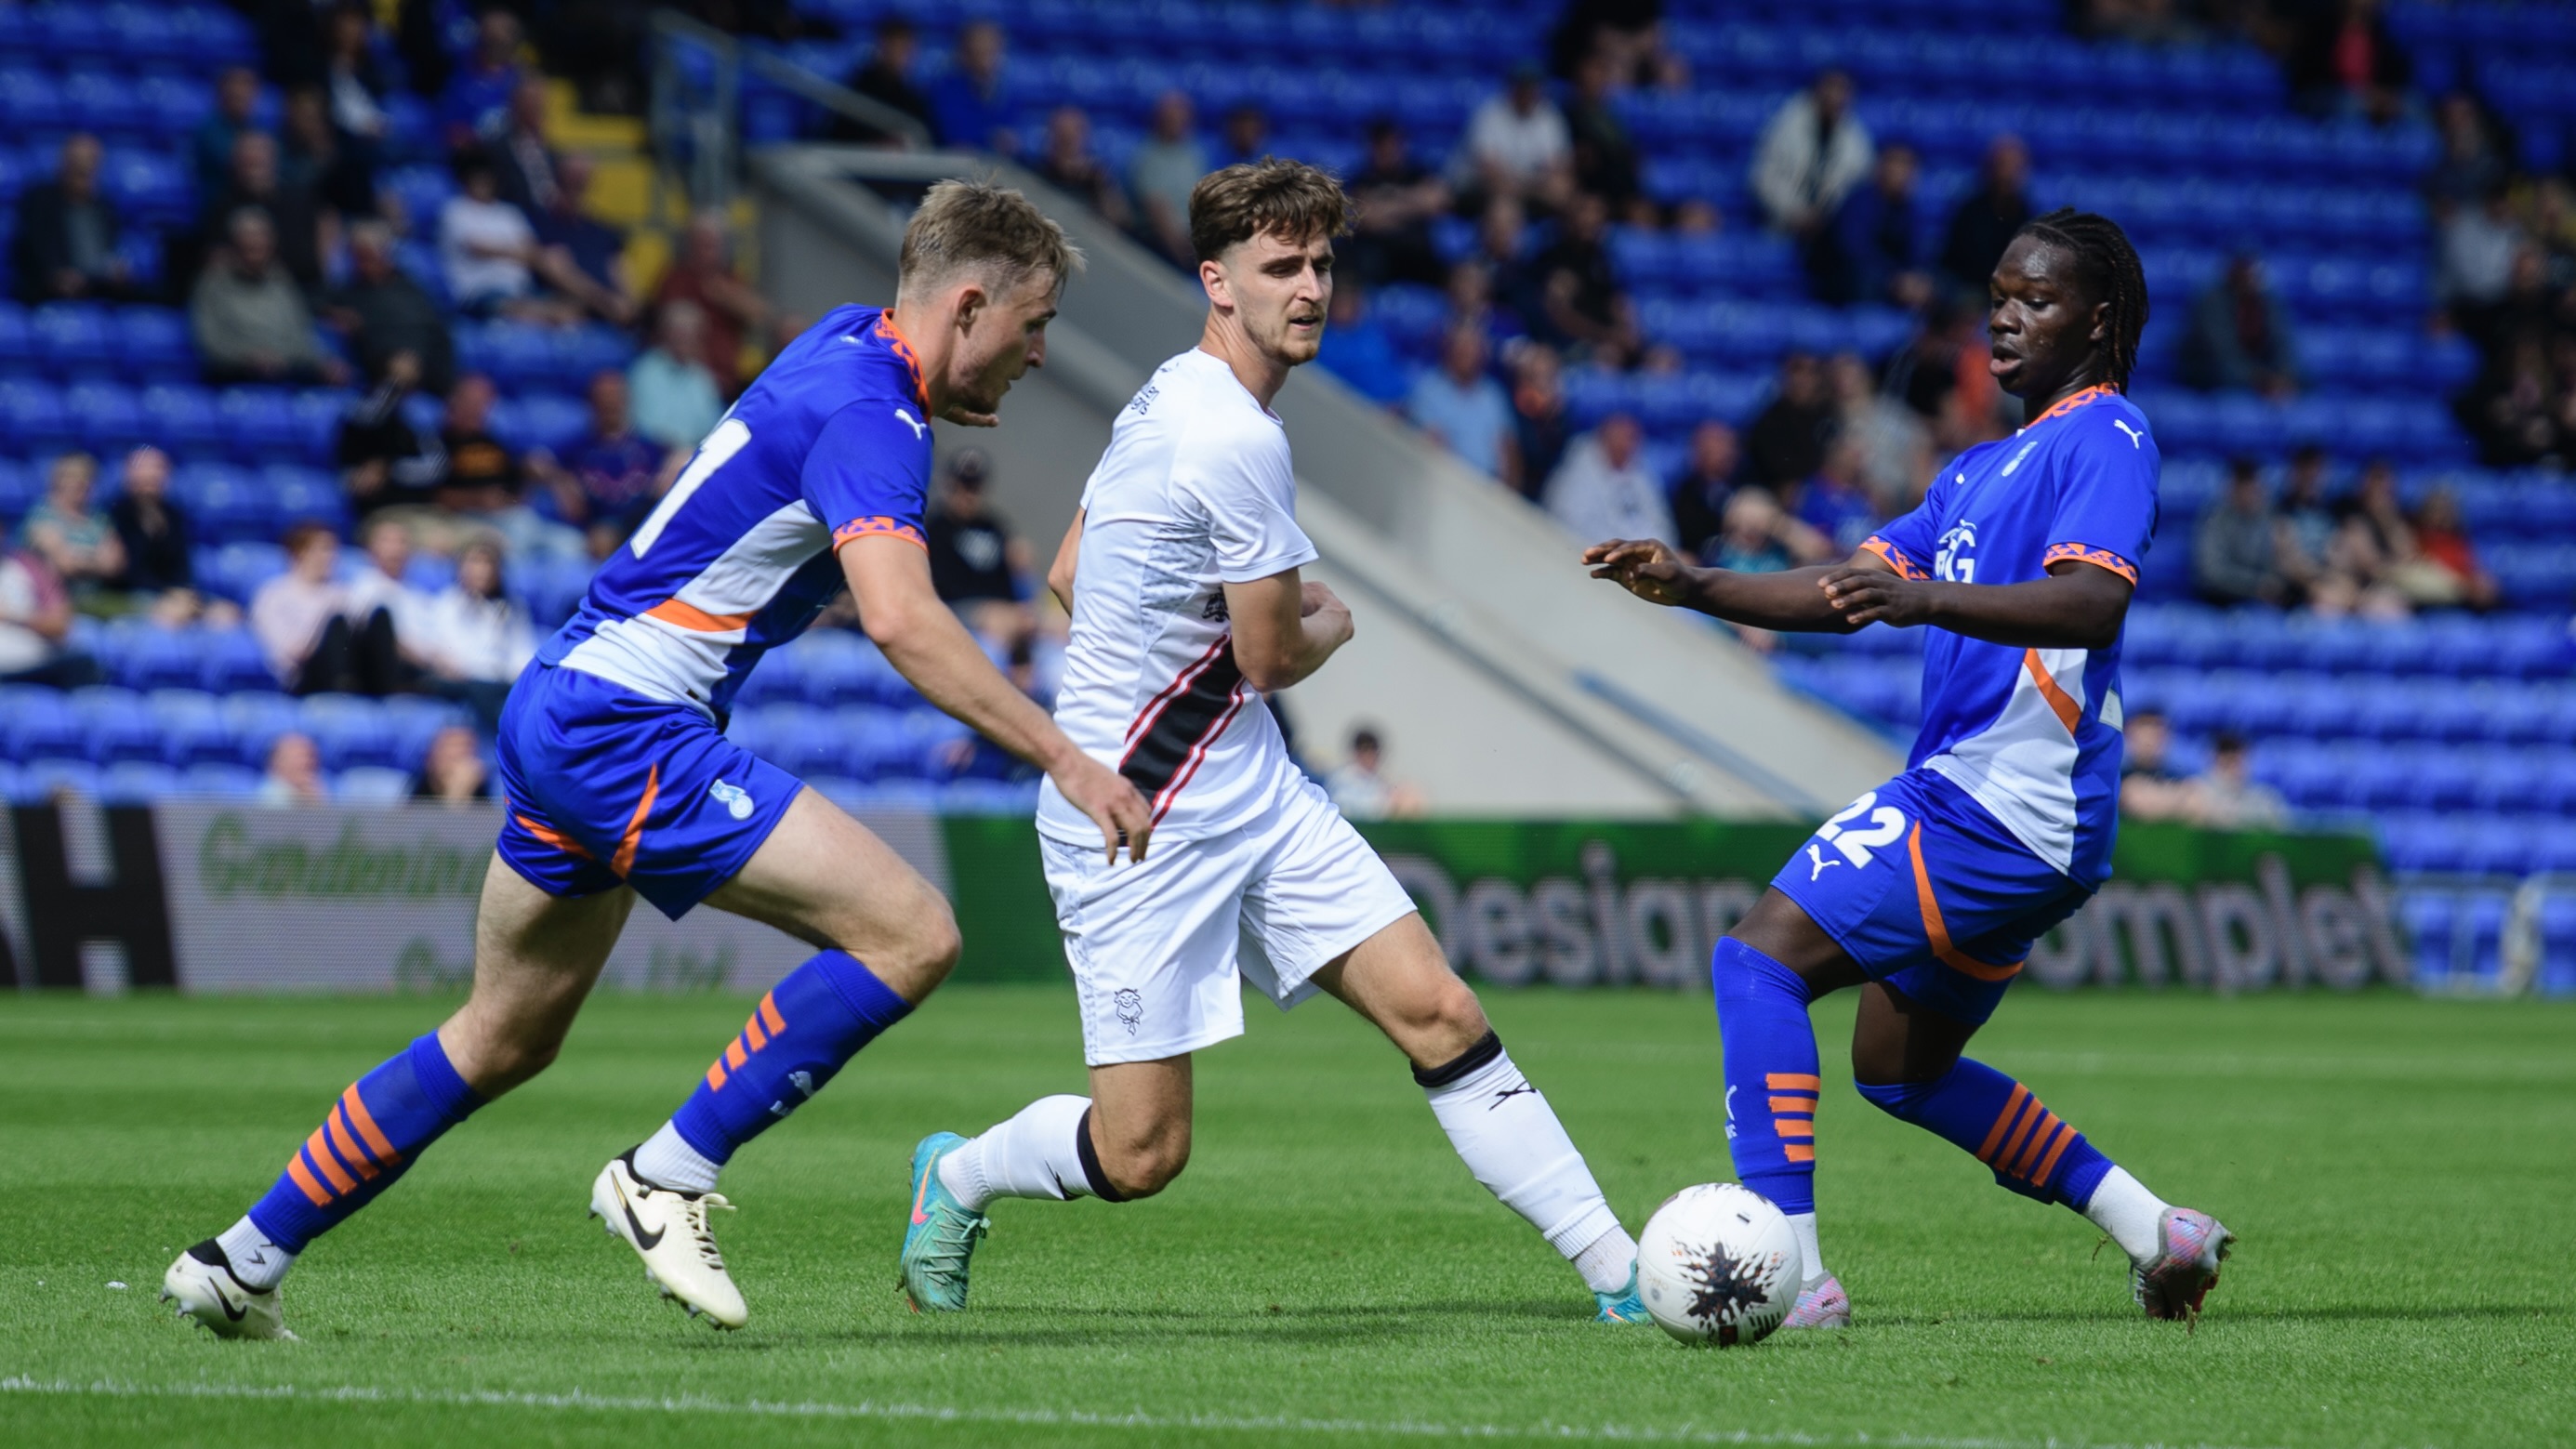 Tom Bayliss fights for possession against Oldham players.